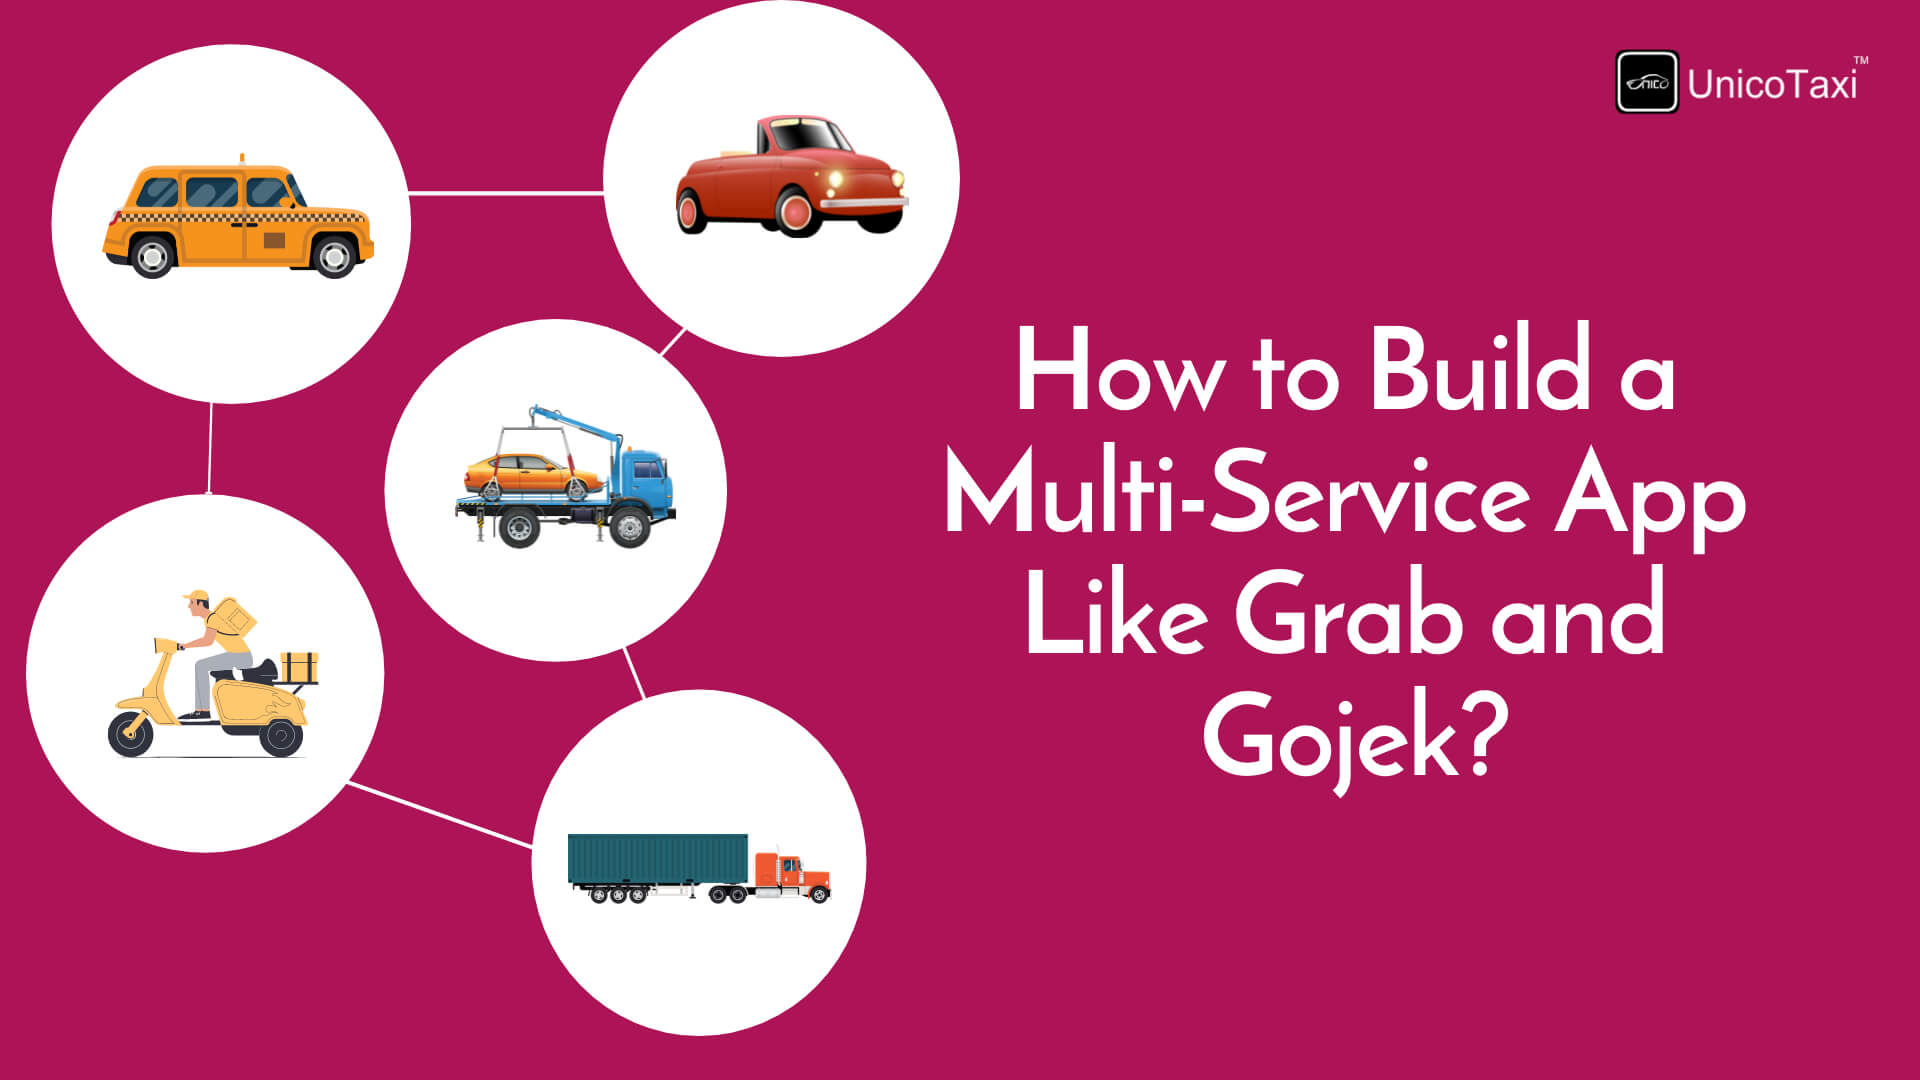   How to Build a Multi-Service App Like Grab and Gojek?